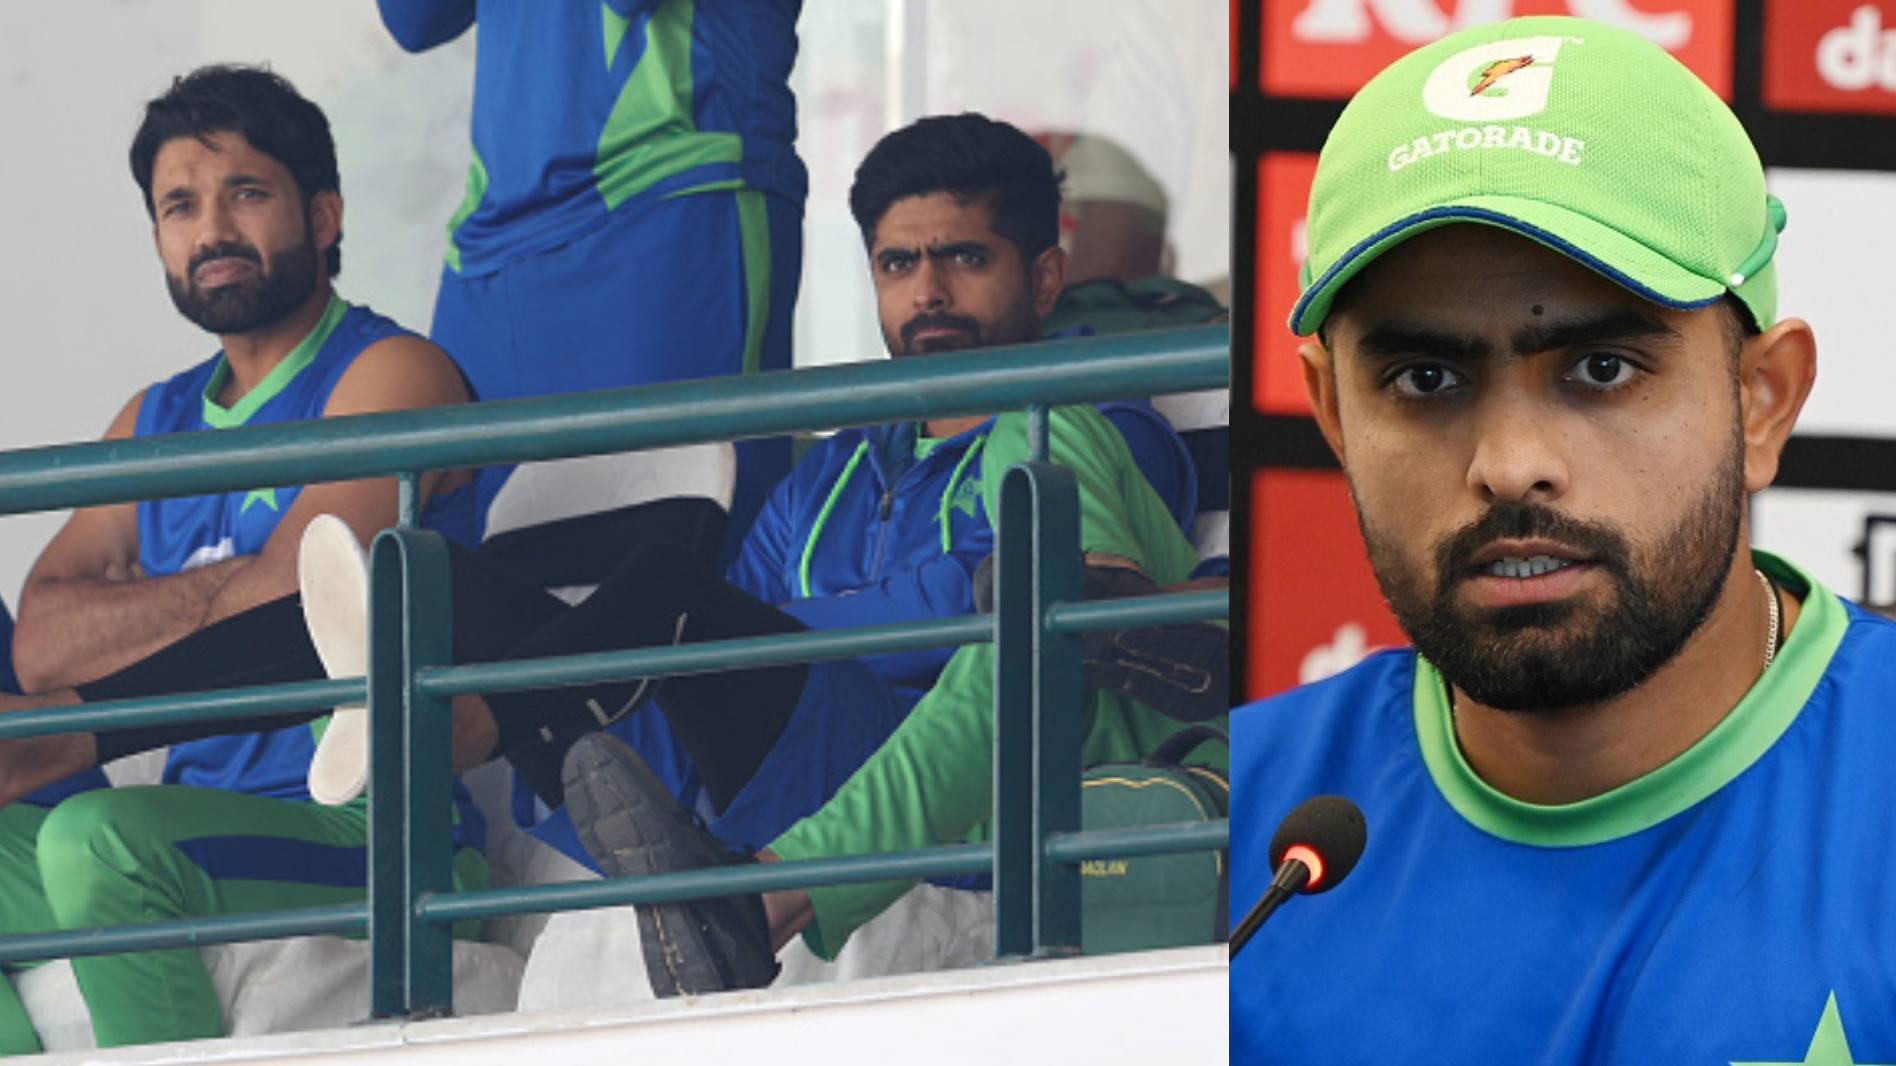 PAK v ENG 2022: WATCH- “Should we stop playing Tests?”- Babar Azam to reporter suggesting he and Rizwan focus on T20Is